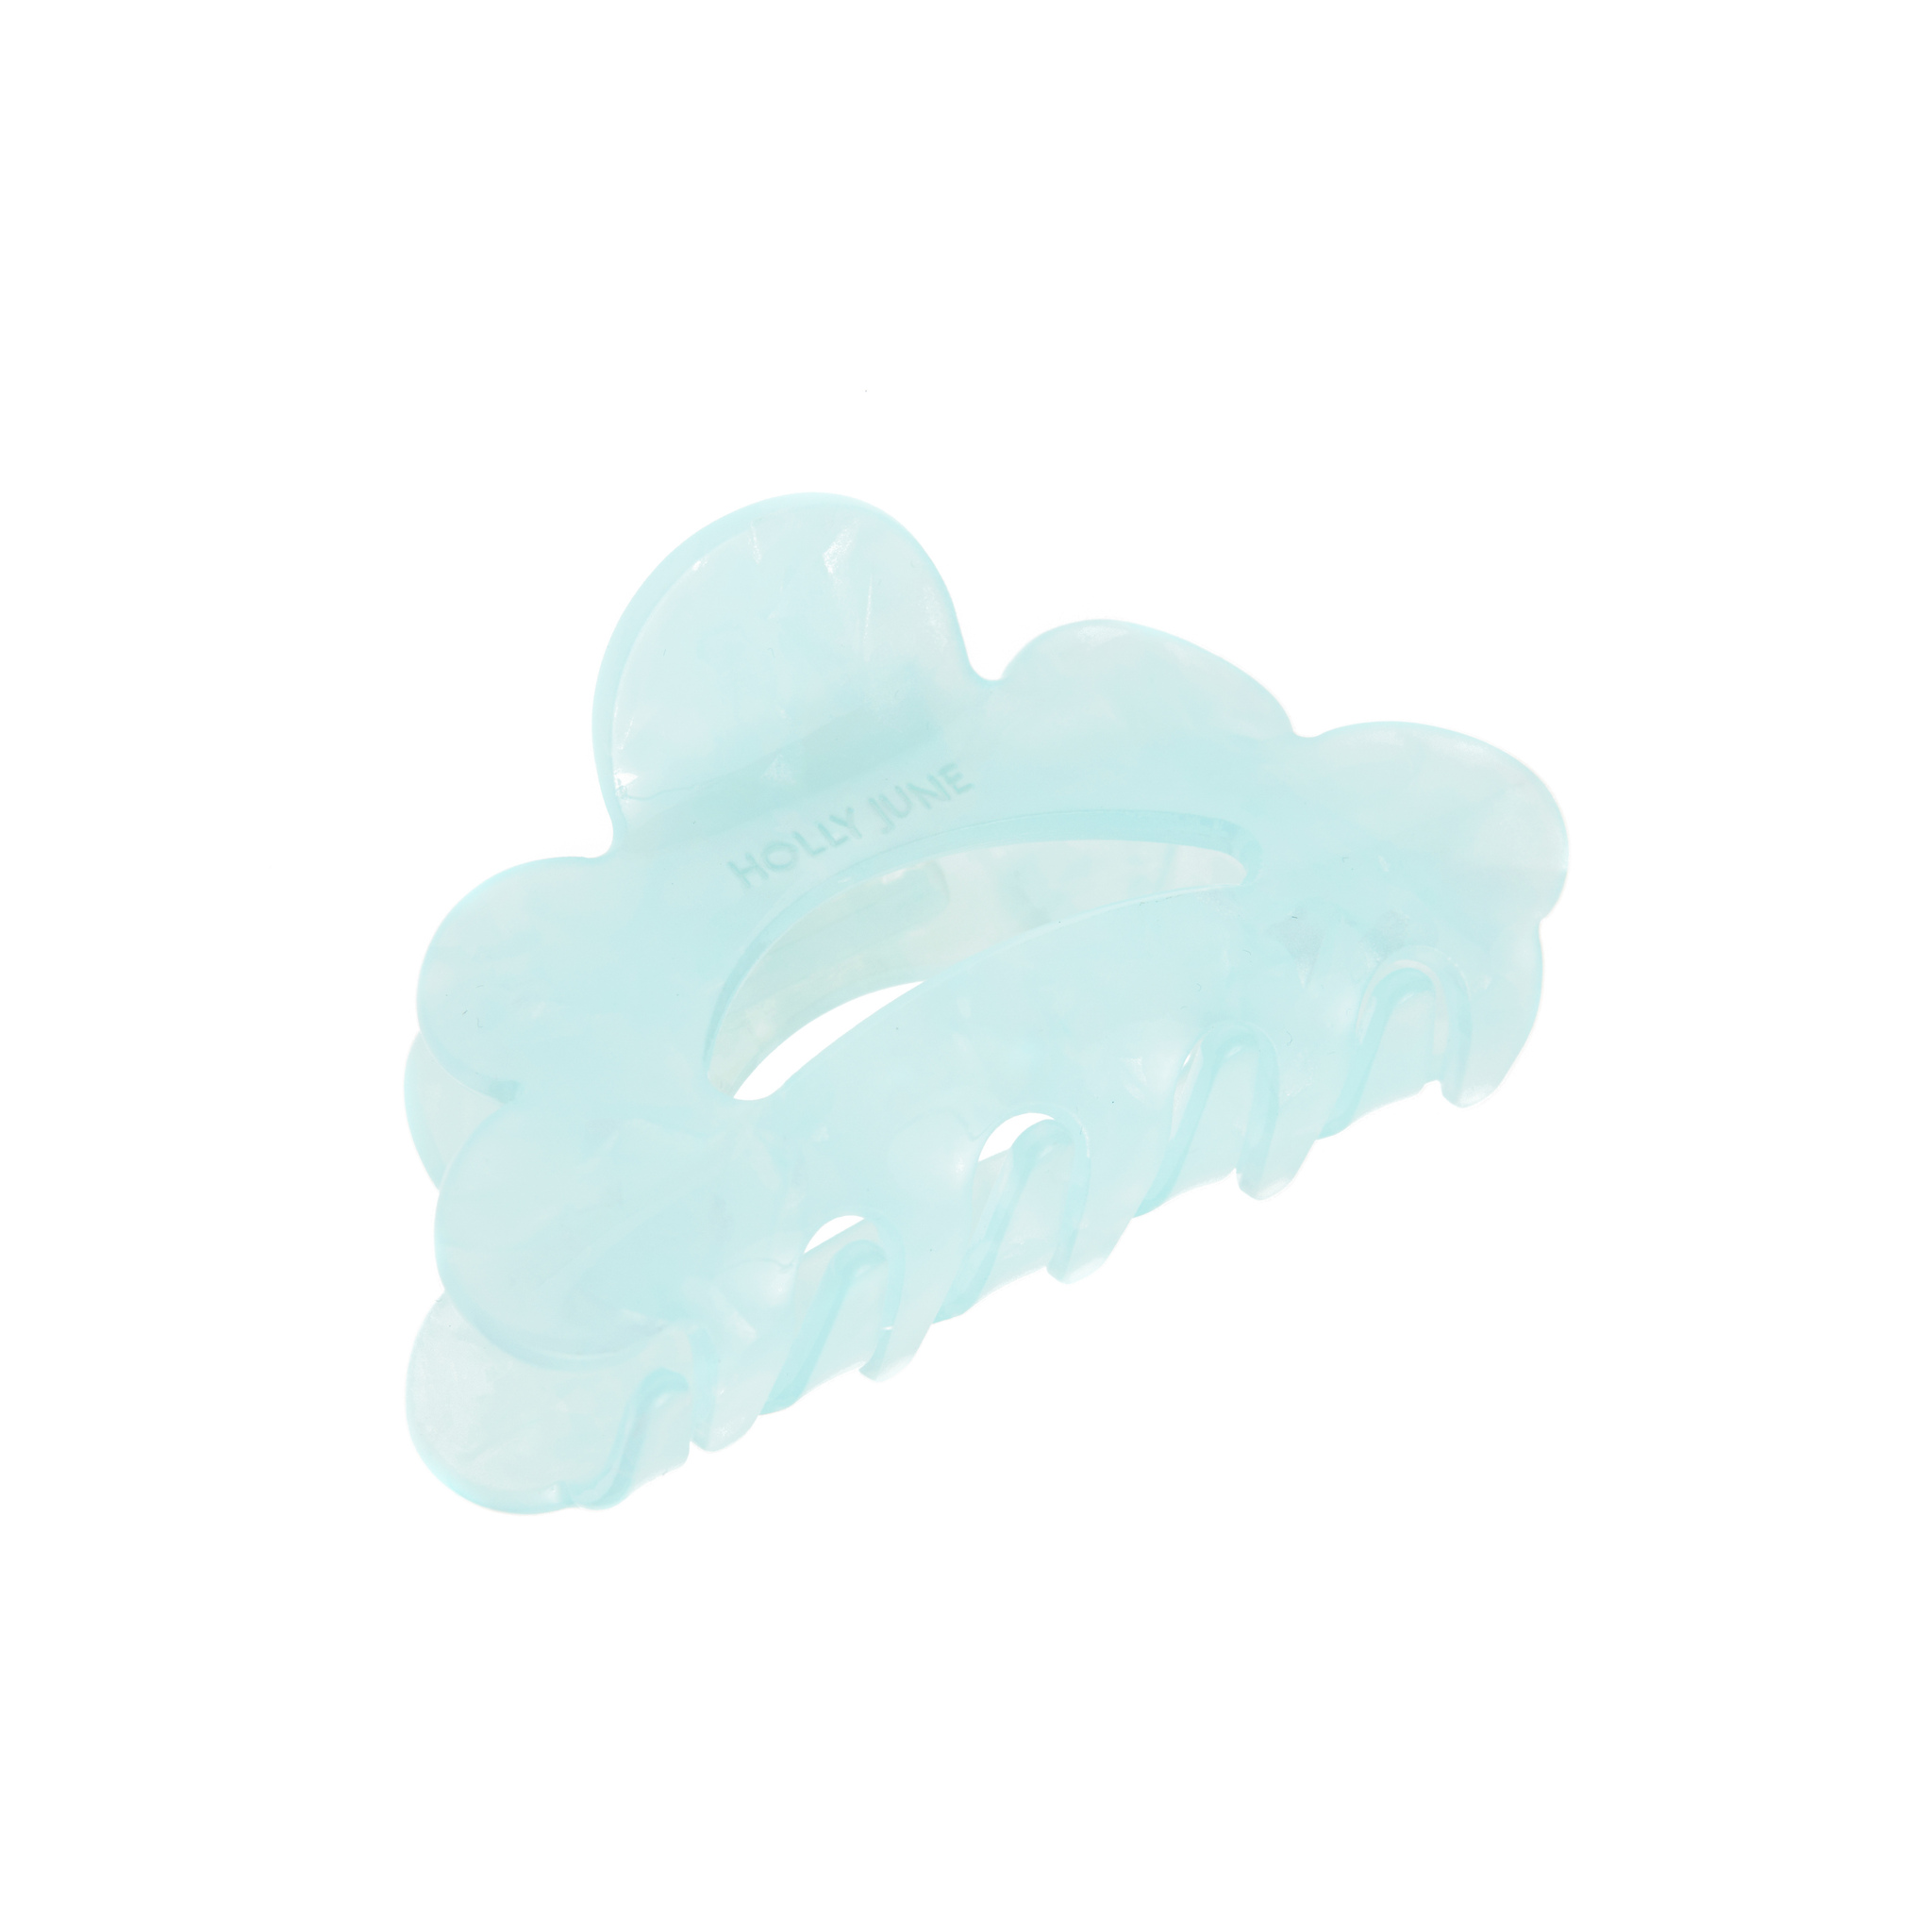 HOLLY JUNE Крабик Cloudy Hair Claw – Blue holly june крабик corgi hair claw